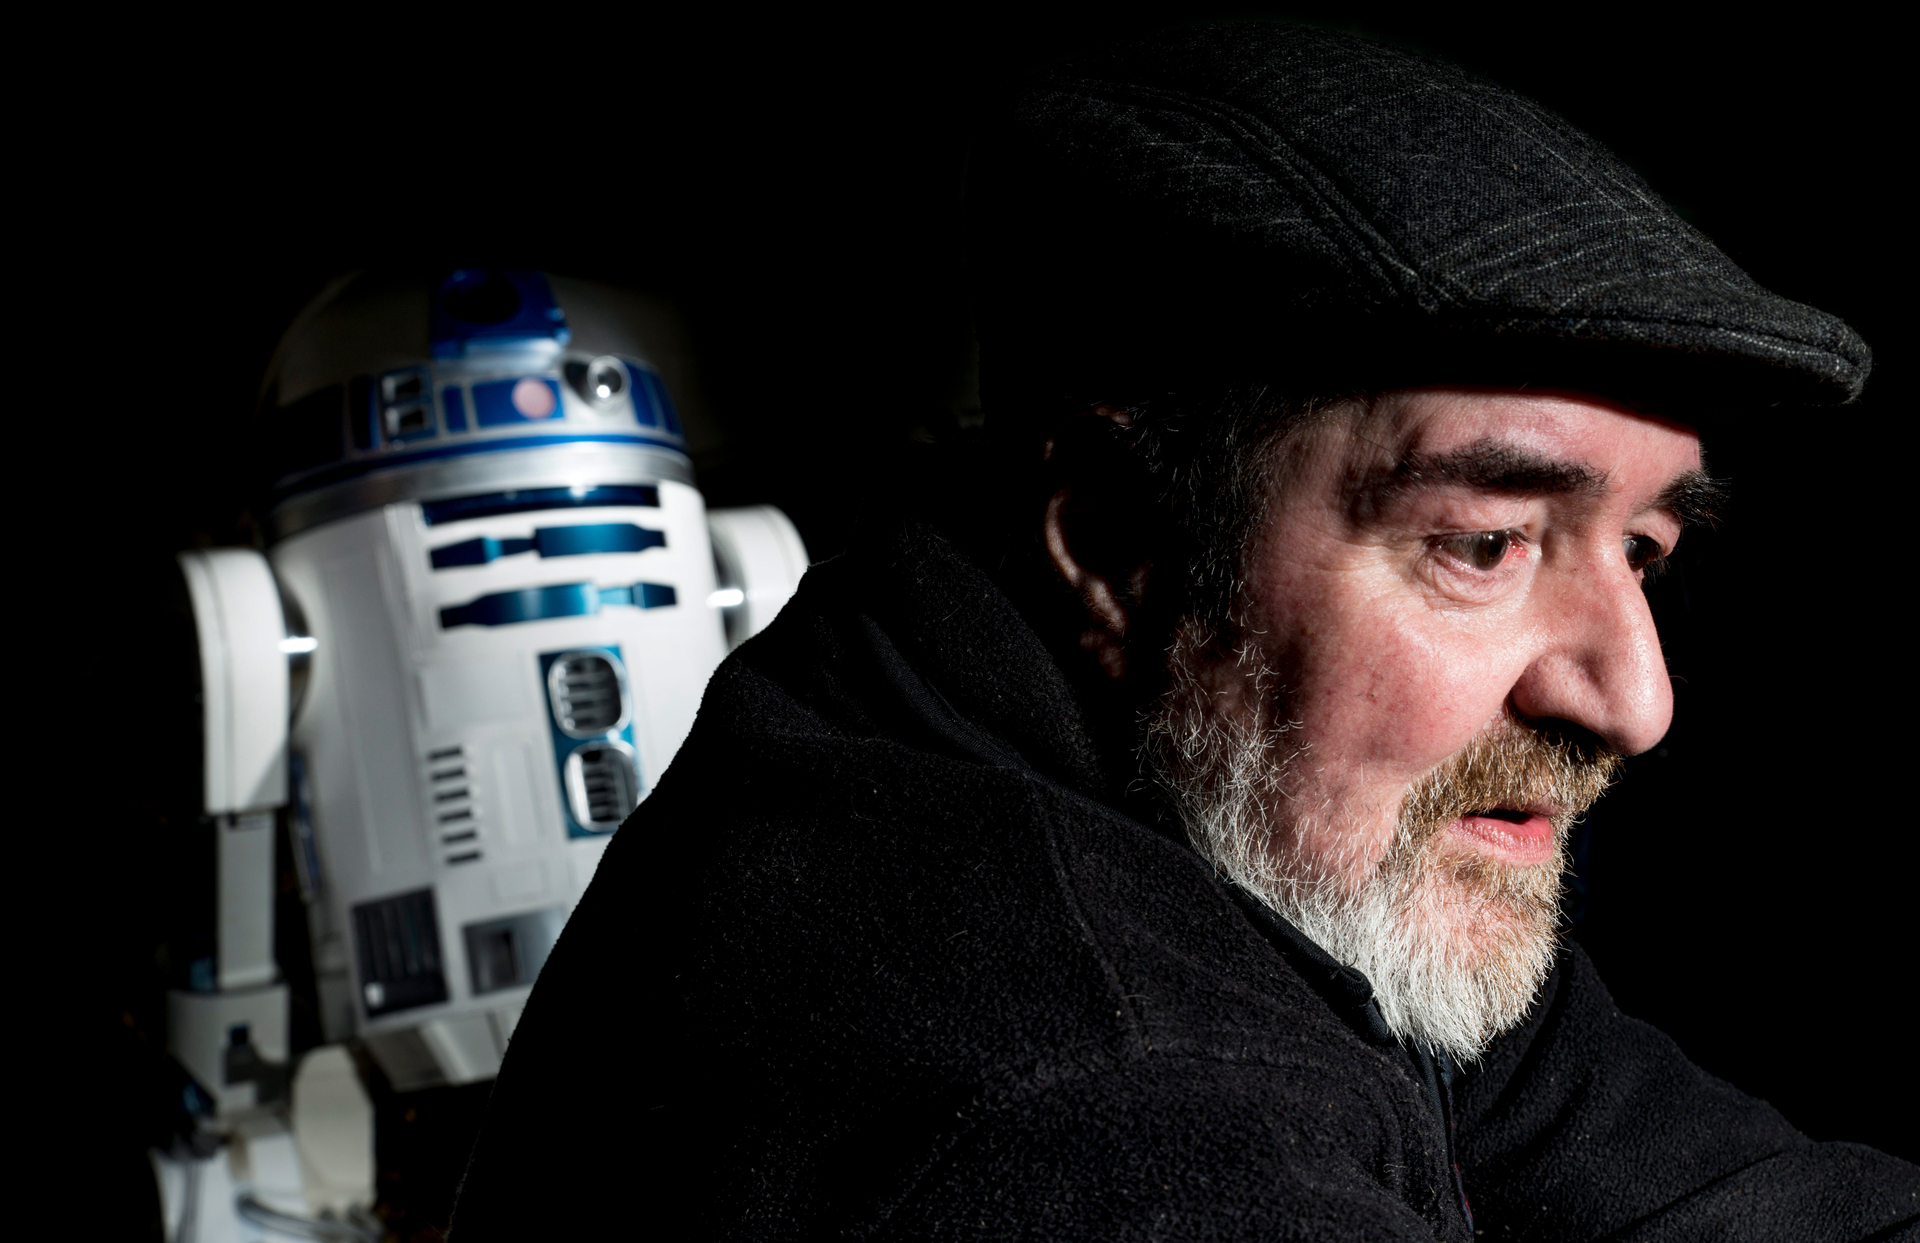 Tony Dyson, Creator of R2-D2, Gone at 68